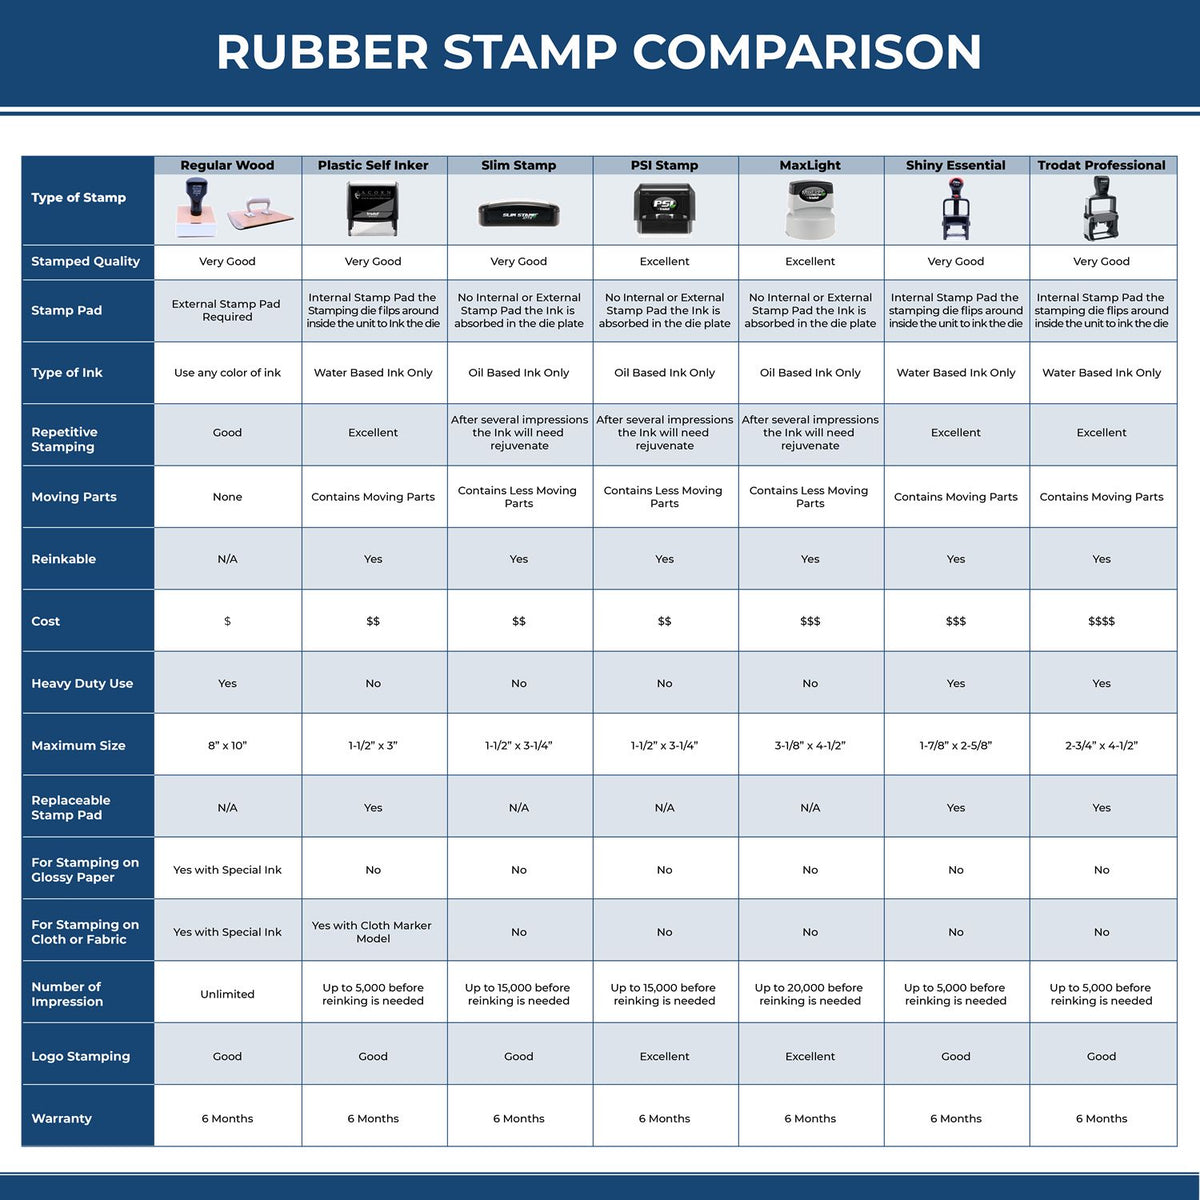 Large Self-Inking Barcode Confidential Stamp 4884S Rubber Stamp Comparison